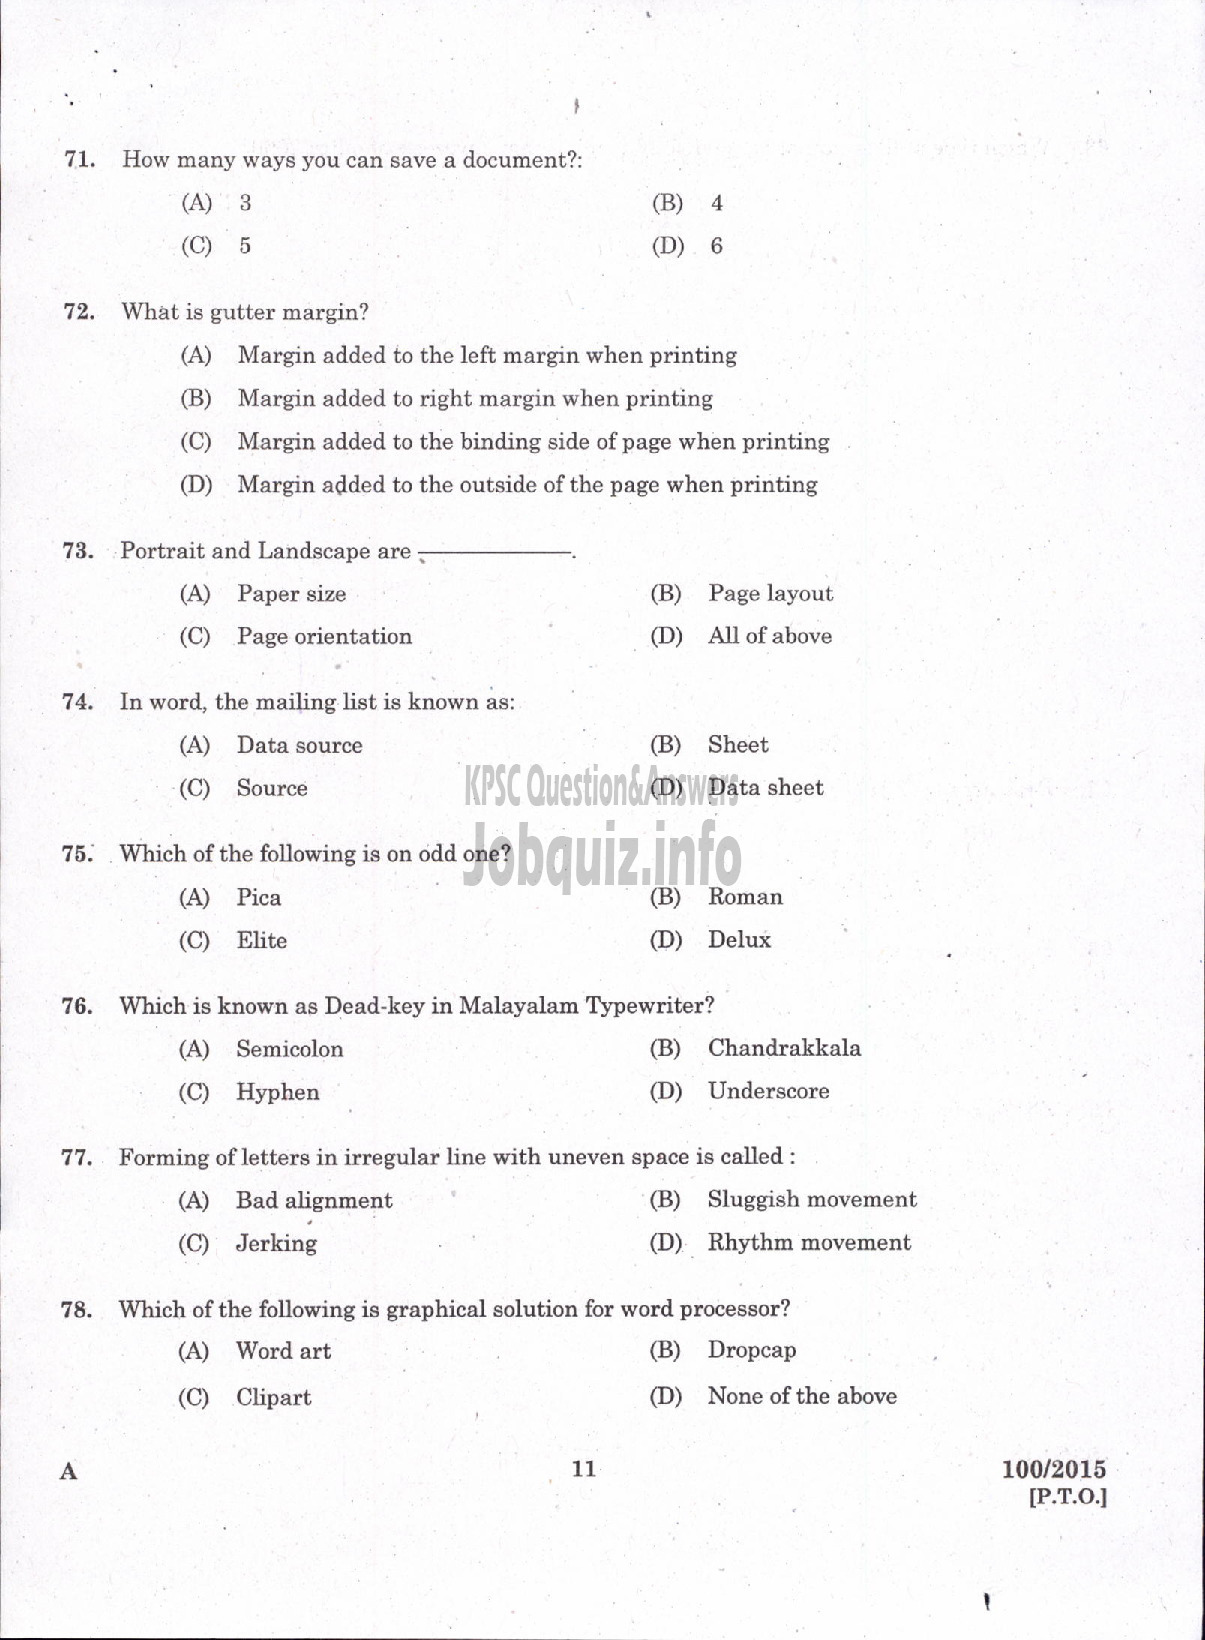 Kerala PSC Question Paper - TYYPIST GRADE II / STENO TYPIST / CLERK TYPIST / TYPIST KERALA STATE HOUSING BOARD / KERALA SHIPPING AND INLAND NAVIGATION CORP LTD / VARIOUS / KERALA ELECTRICAL AND ALLIED ENGINEERING COMPANY LTD-9